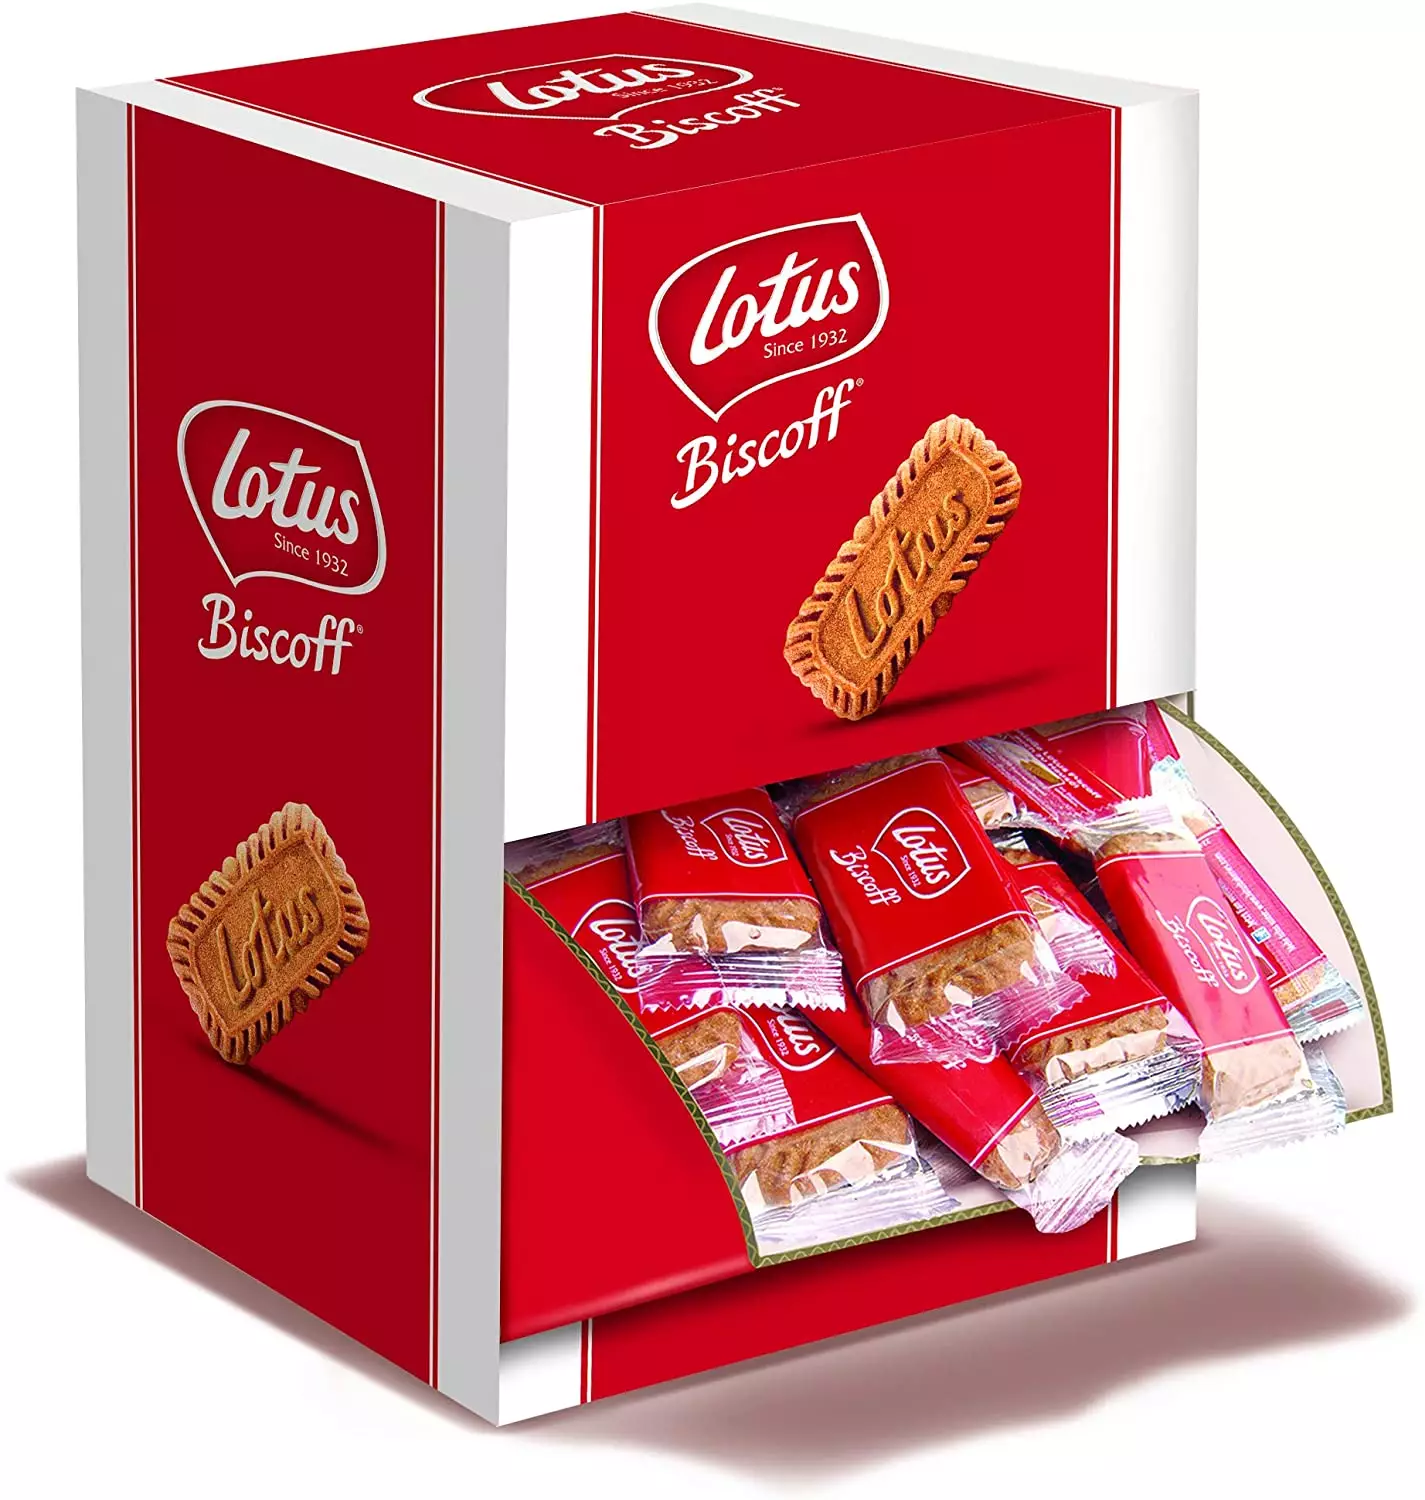 The Biscoff Biscuit Dispenser contains 150 individually wrapped crisp caramel biccies (